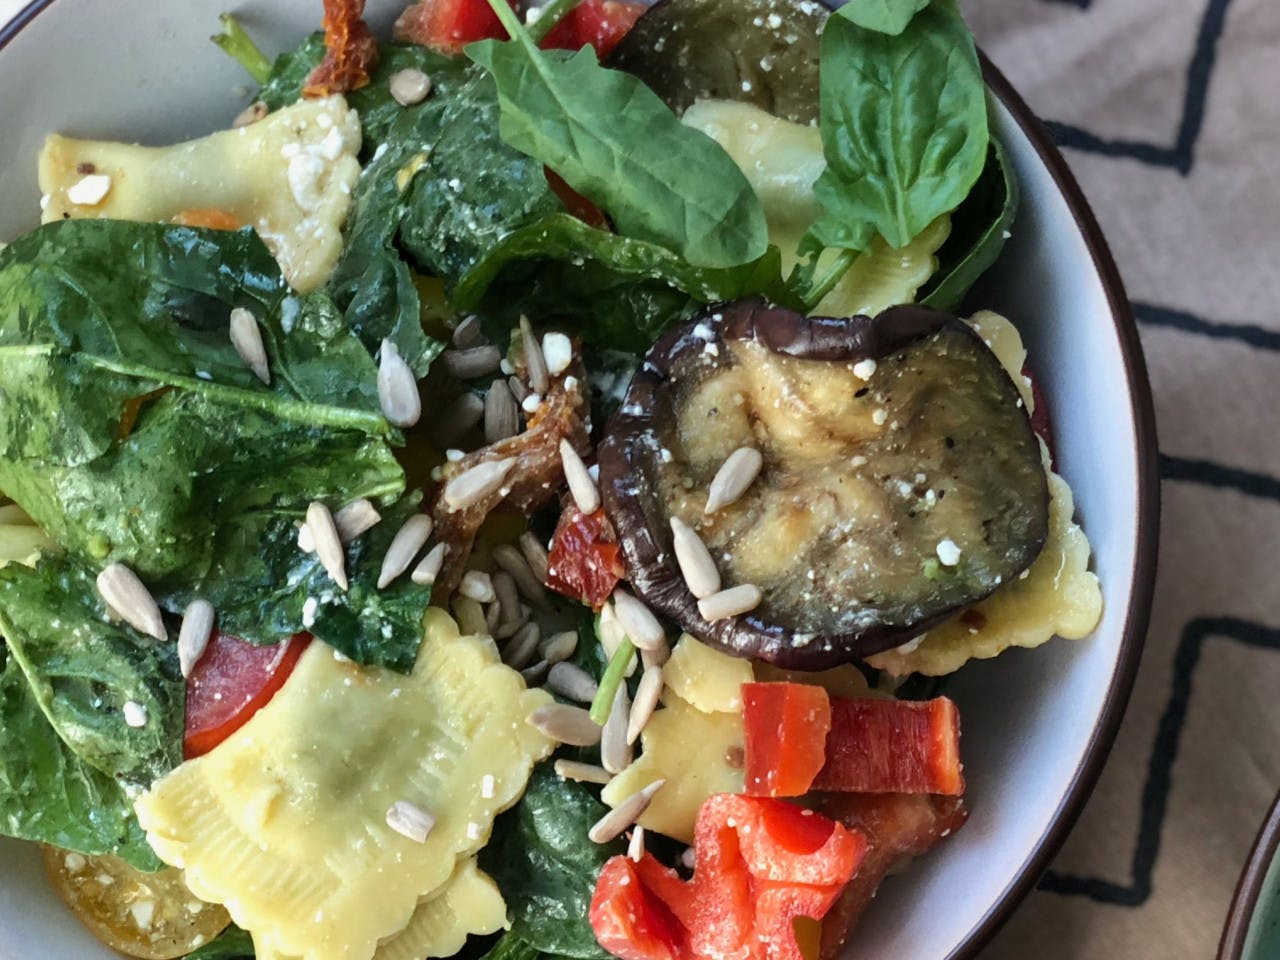 Ravioli salad with spinach and grilled aubergine